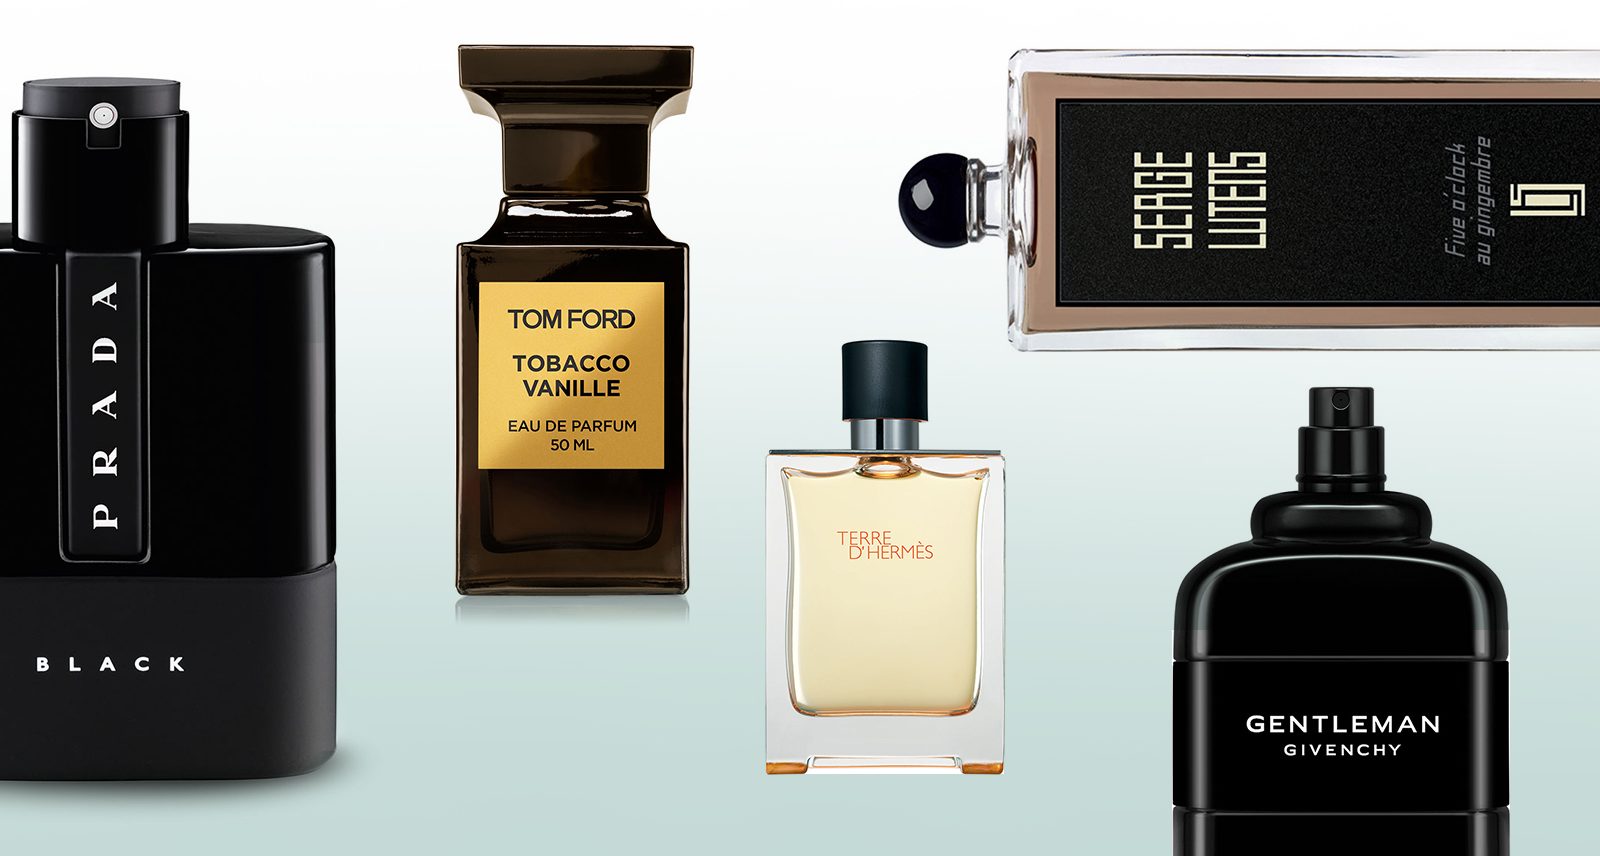 Heat Up Your Winter With A Warm New Fragrance | Sharp Magazine